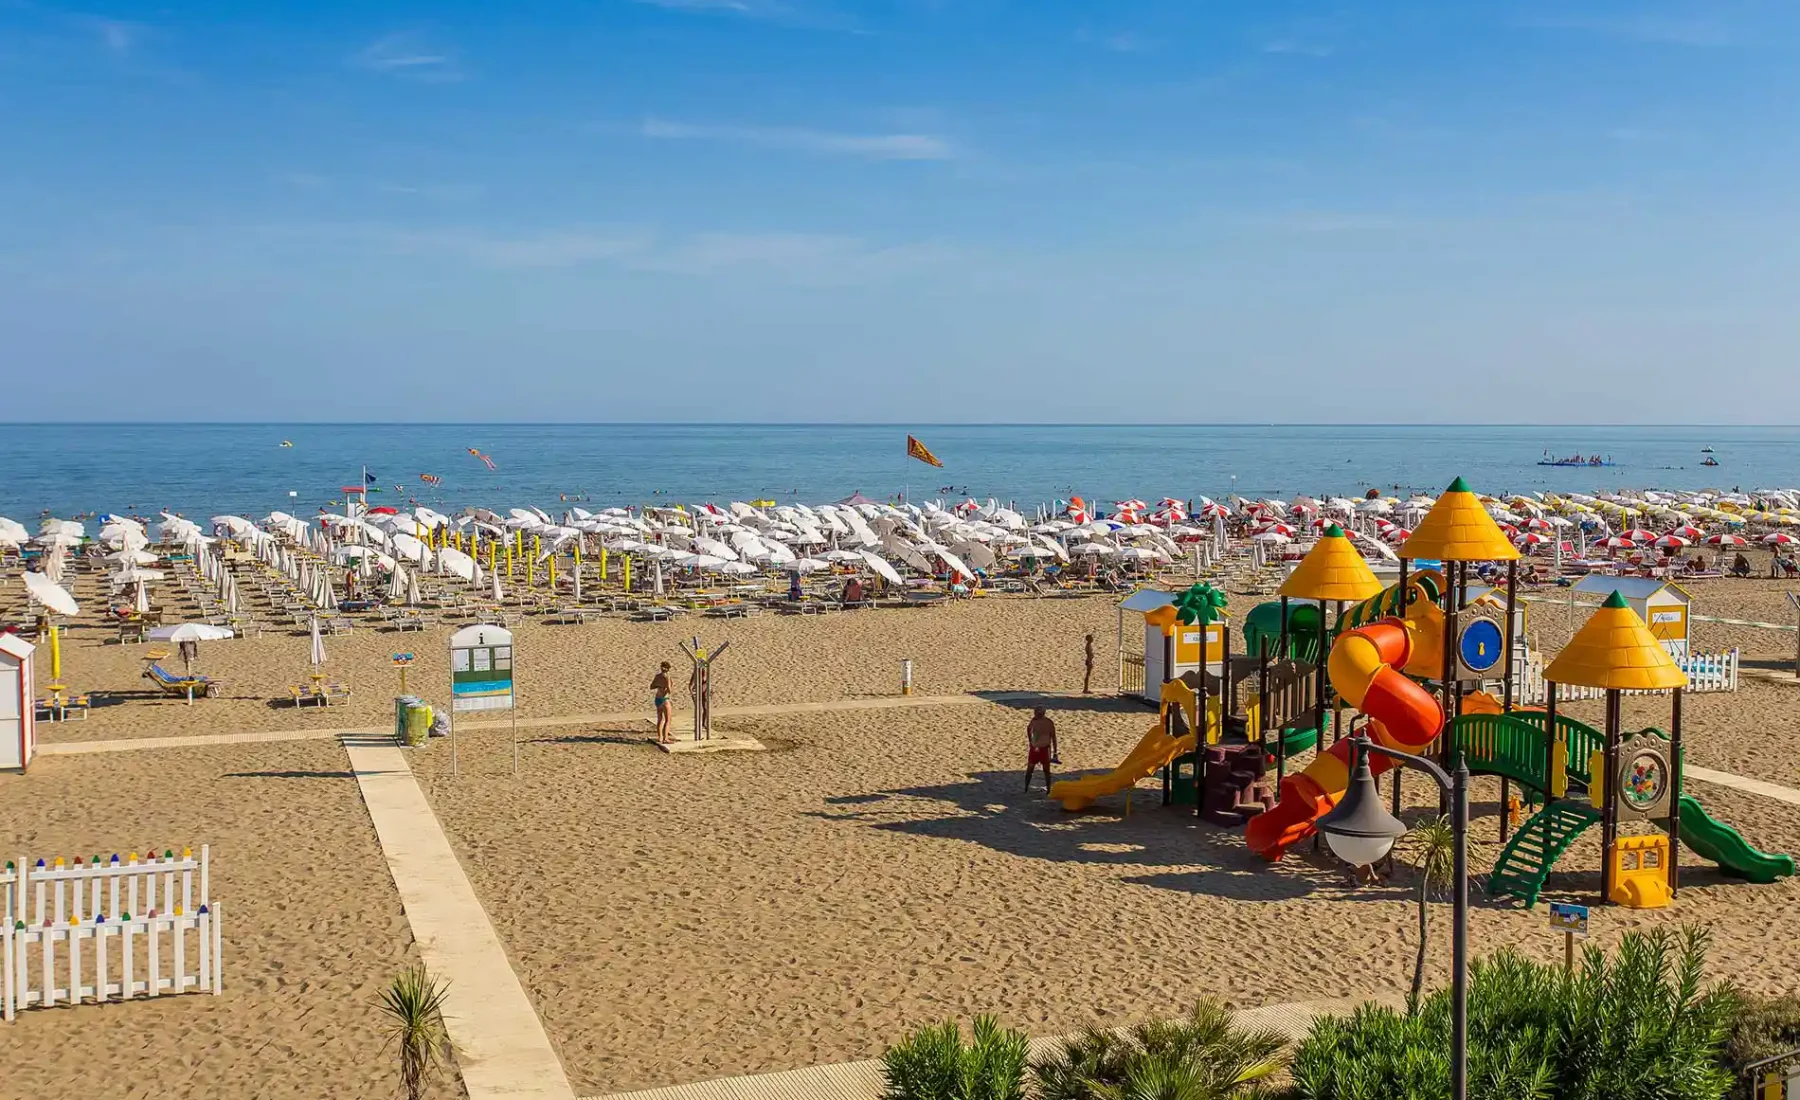 A dive in Caorle – Holiday Deals